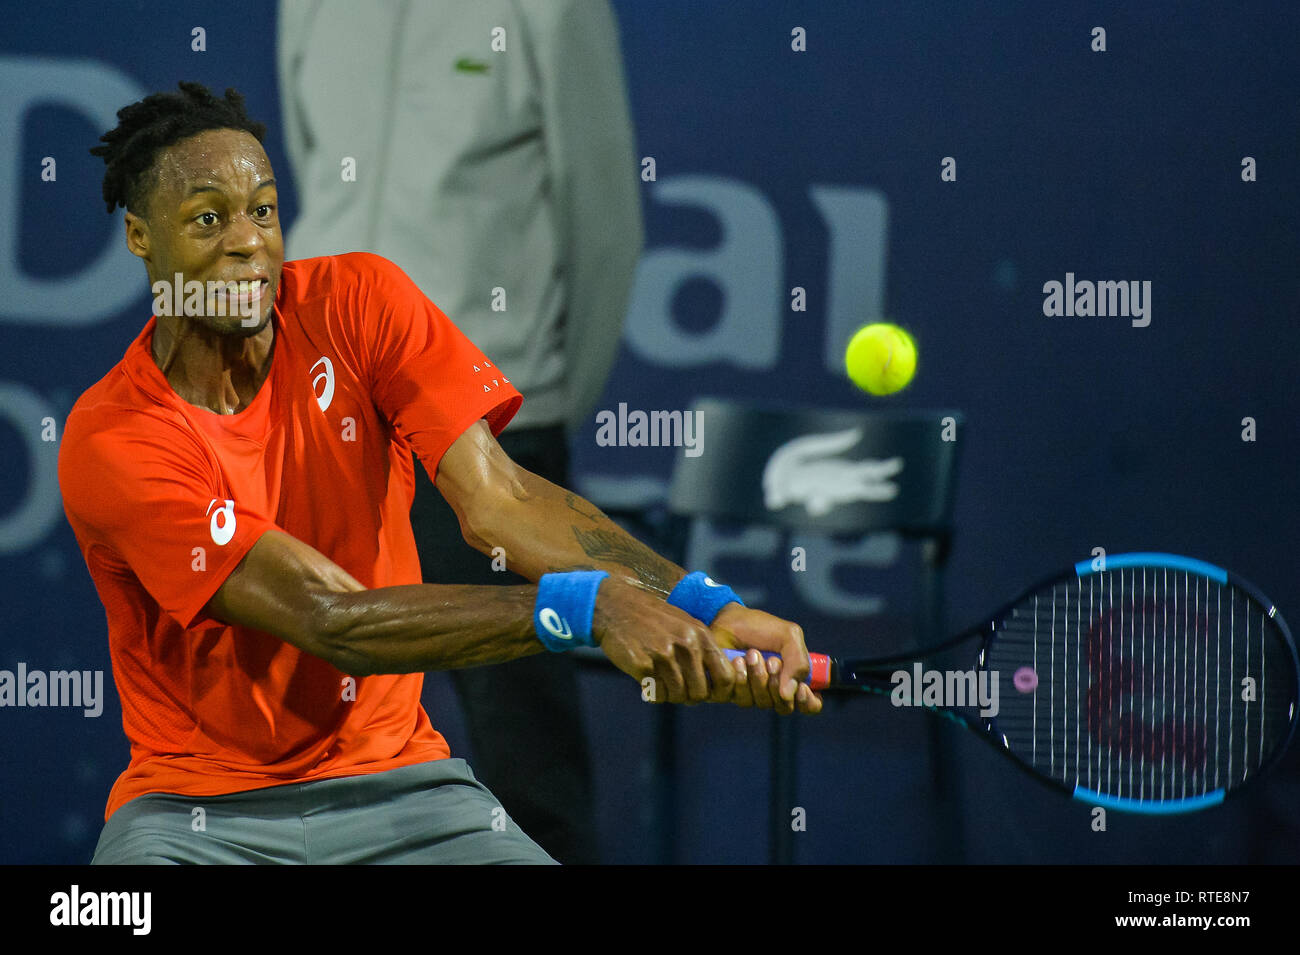 Dubai, UAE. 1st March 2019. Gael Monfils of France plays a backhand during his semifinal match against Stefanos Tsitsipas of Greece at the 2019 Dubai Duty Free Tennis Championships. Monfils lost the match 6-4, 6-7(4-7), 6-7(4-7) Credit: Feroz Khan/Alamy Live News Stock Photo